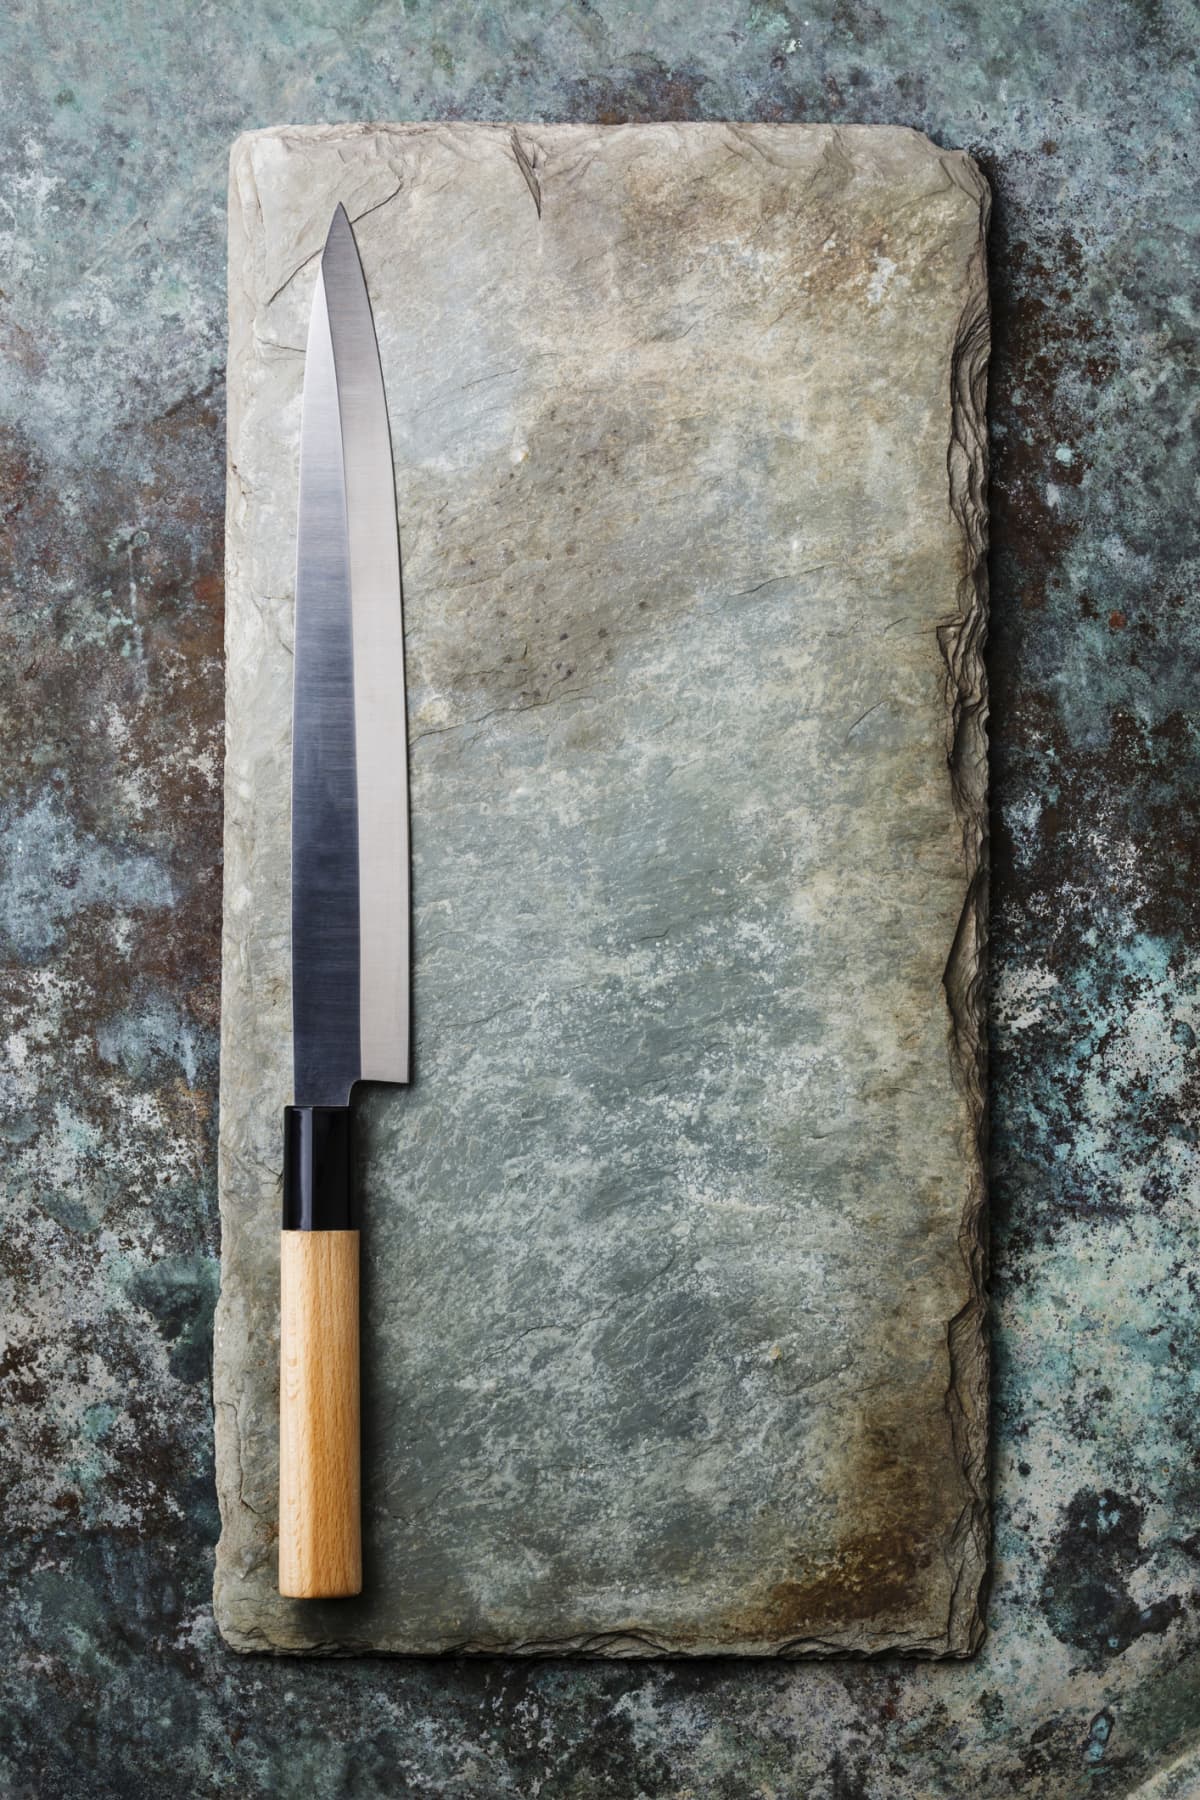 A knife atop a sharpening stone